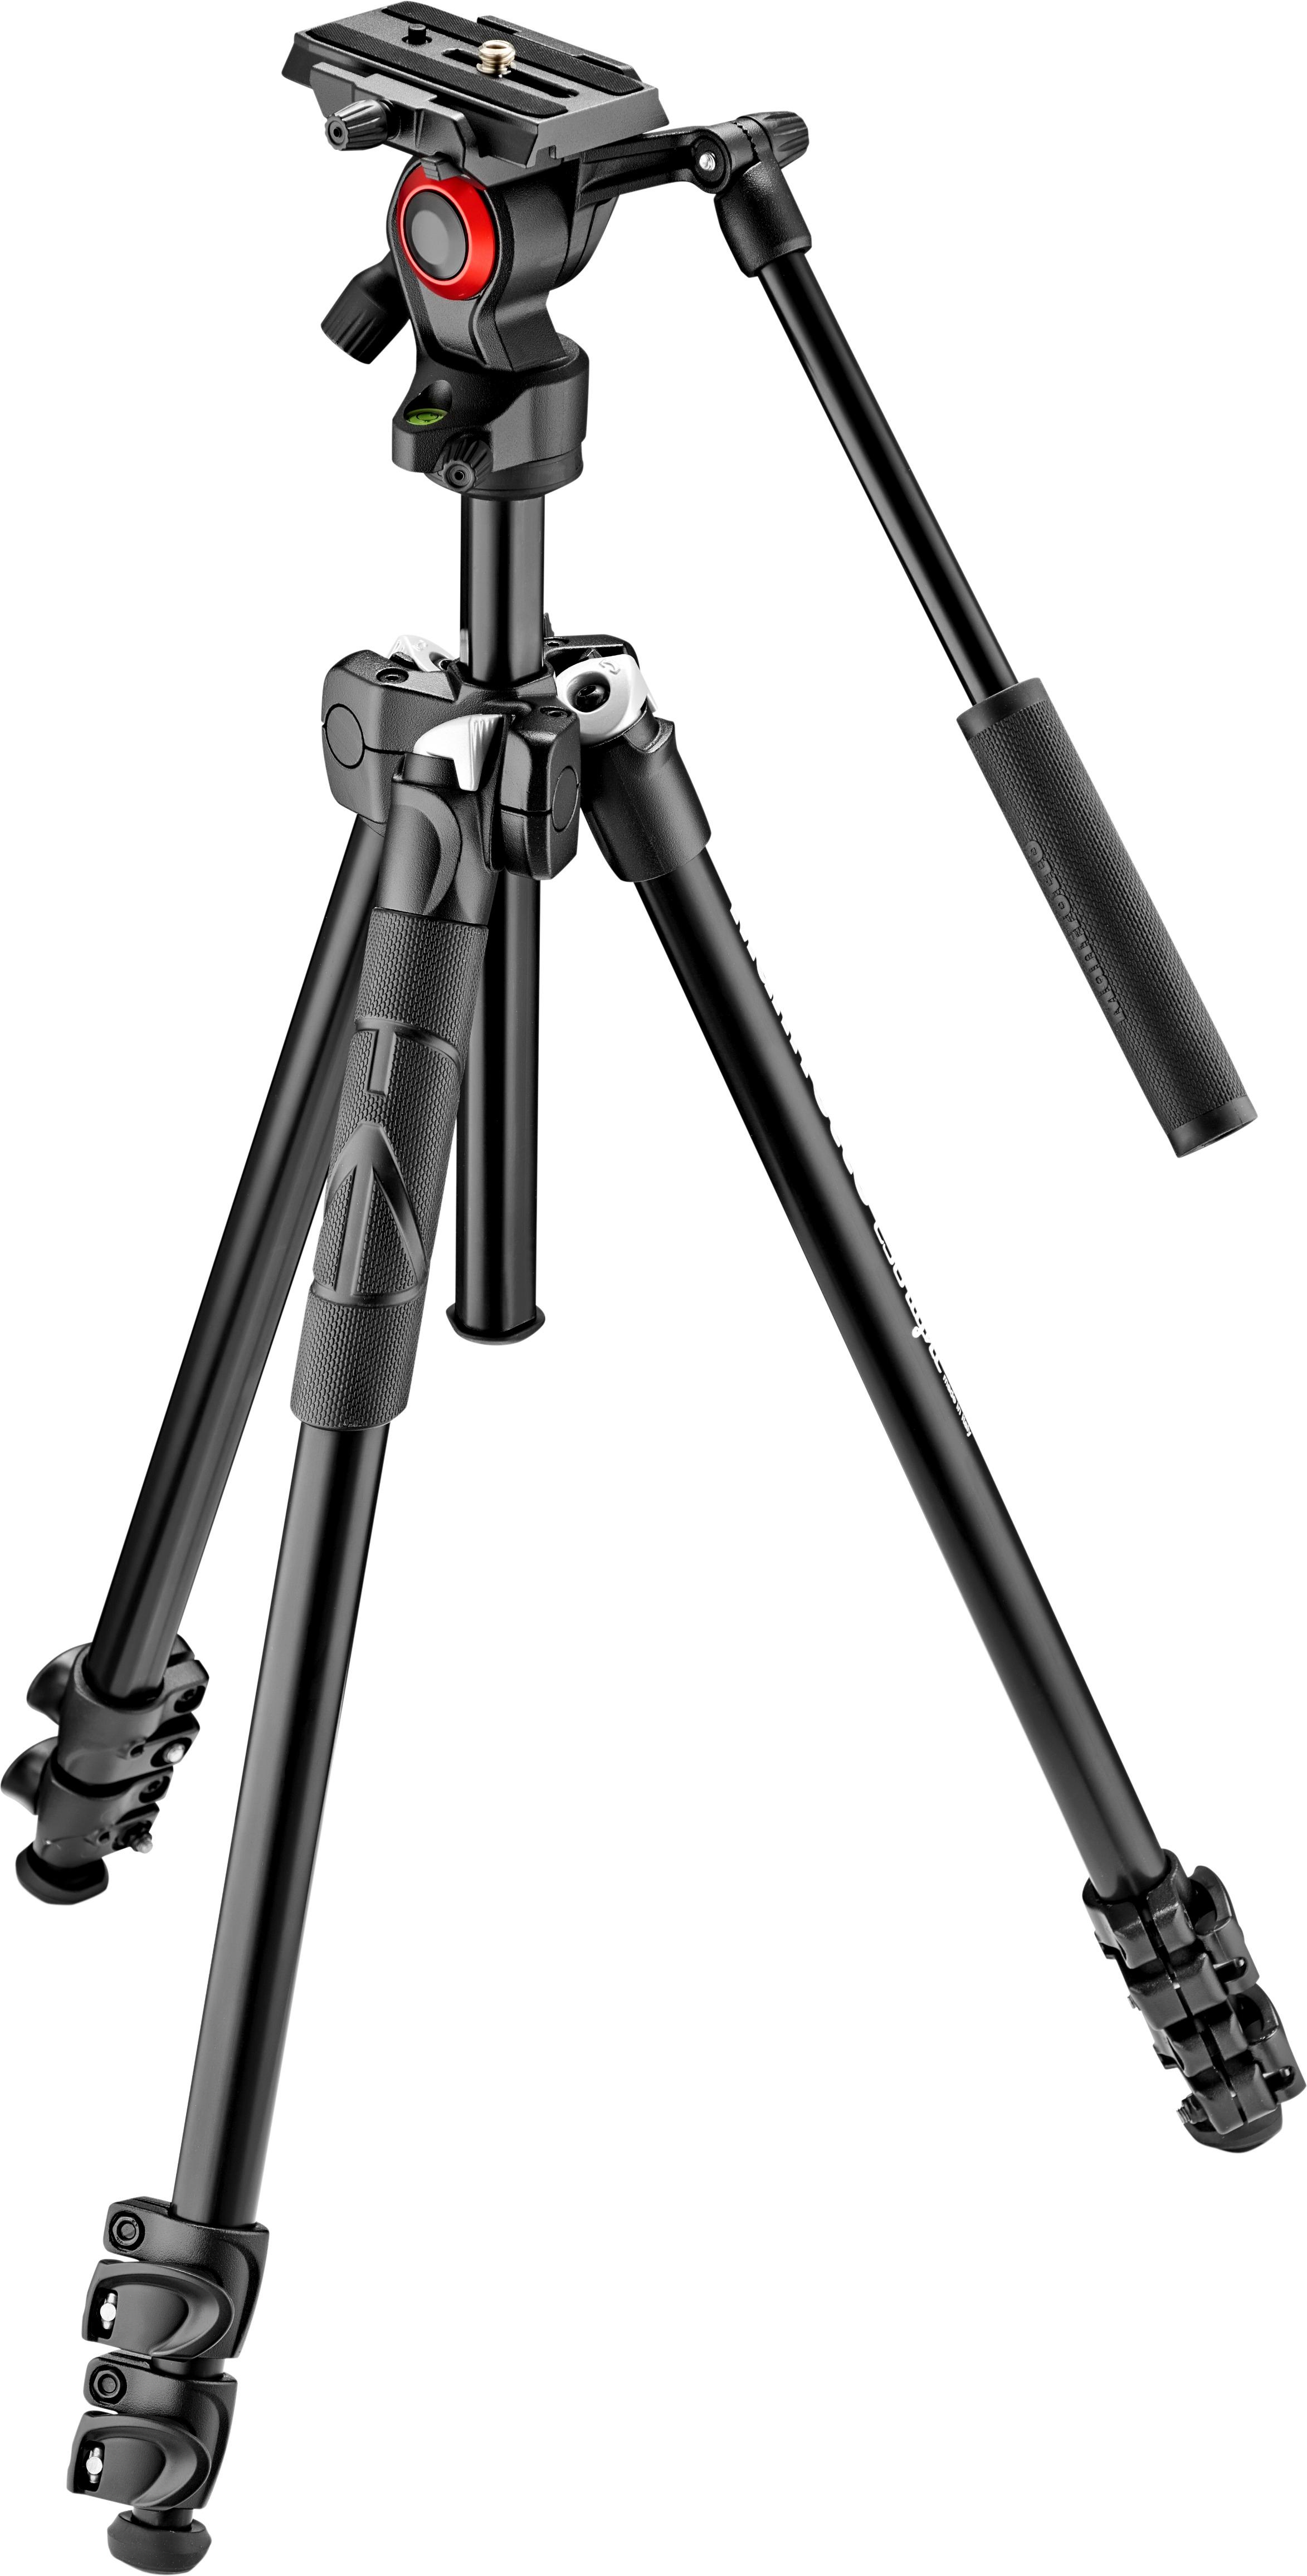 Angle View: Manfrotto - 290 Tripod with Fluid Video Head - Black